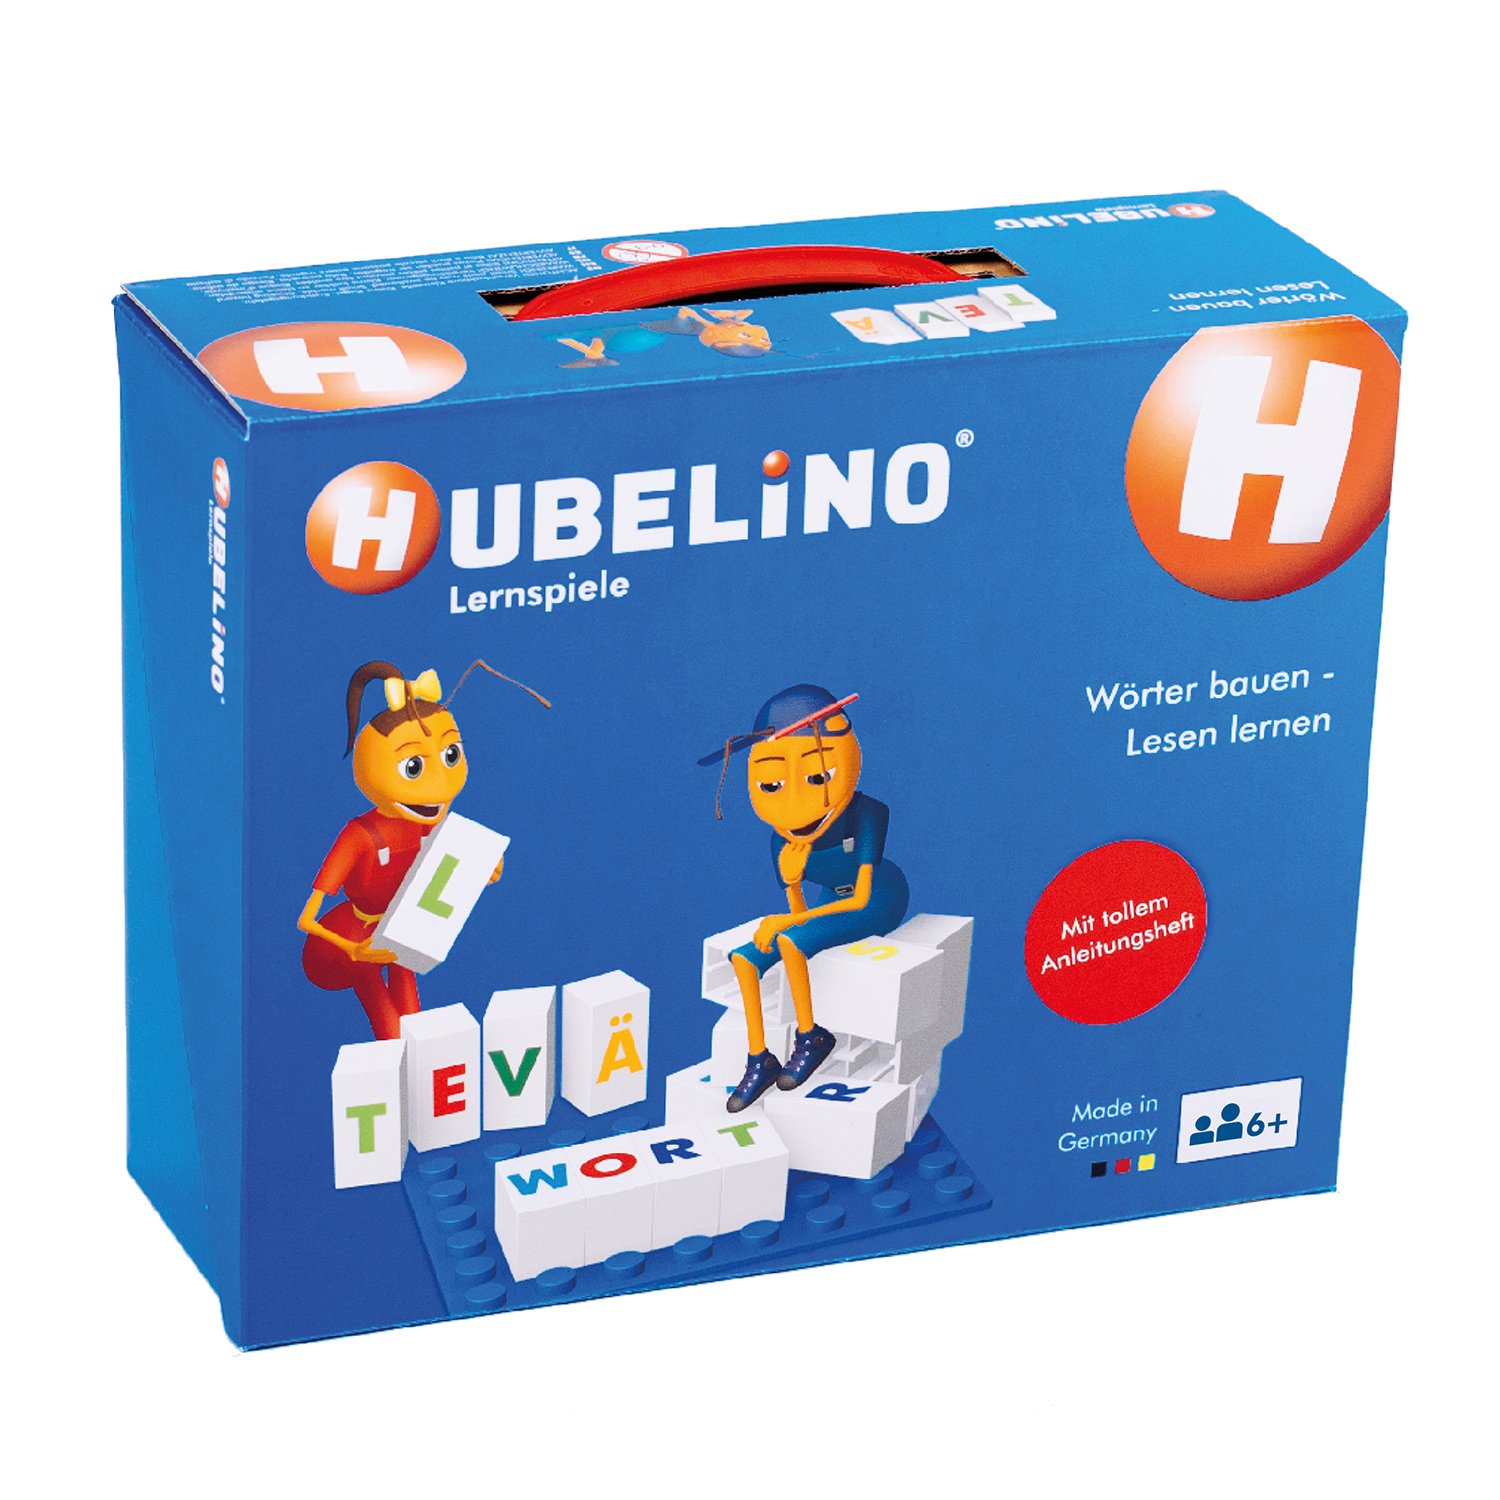 Hube Lino Educational Game Build Words To Learn To Read Years Compatible With Duplo P